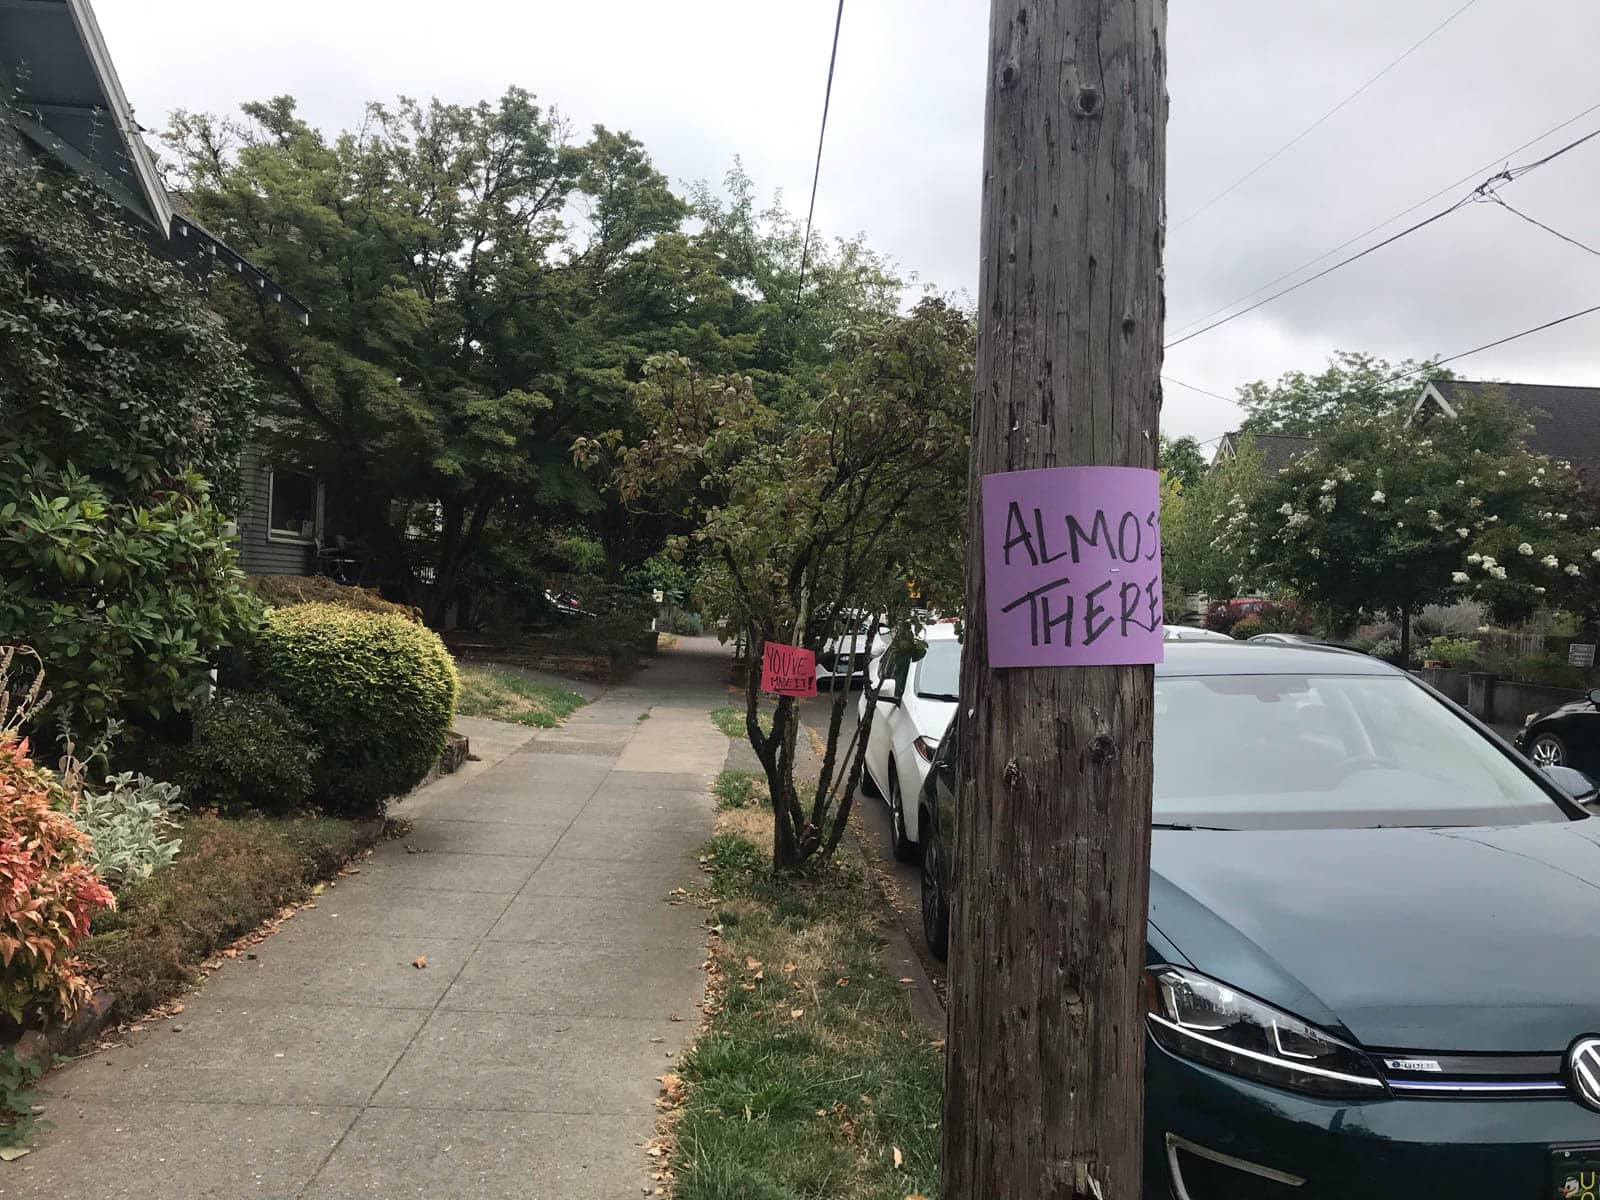 A path on the side of a suburban street. The street pole has a purple piece of paper with “almost there” written on it”, and further away, a tree with a red sign reading “you’ve made it!”